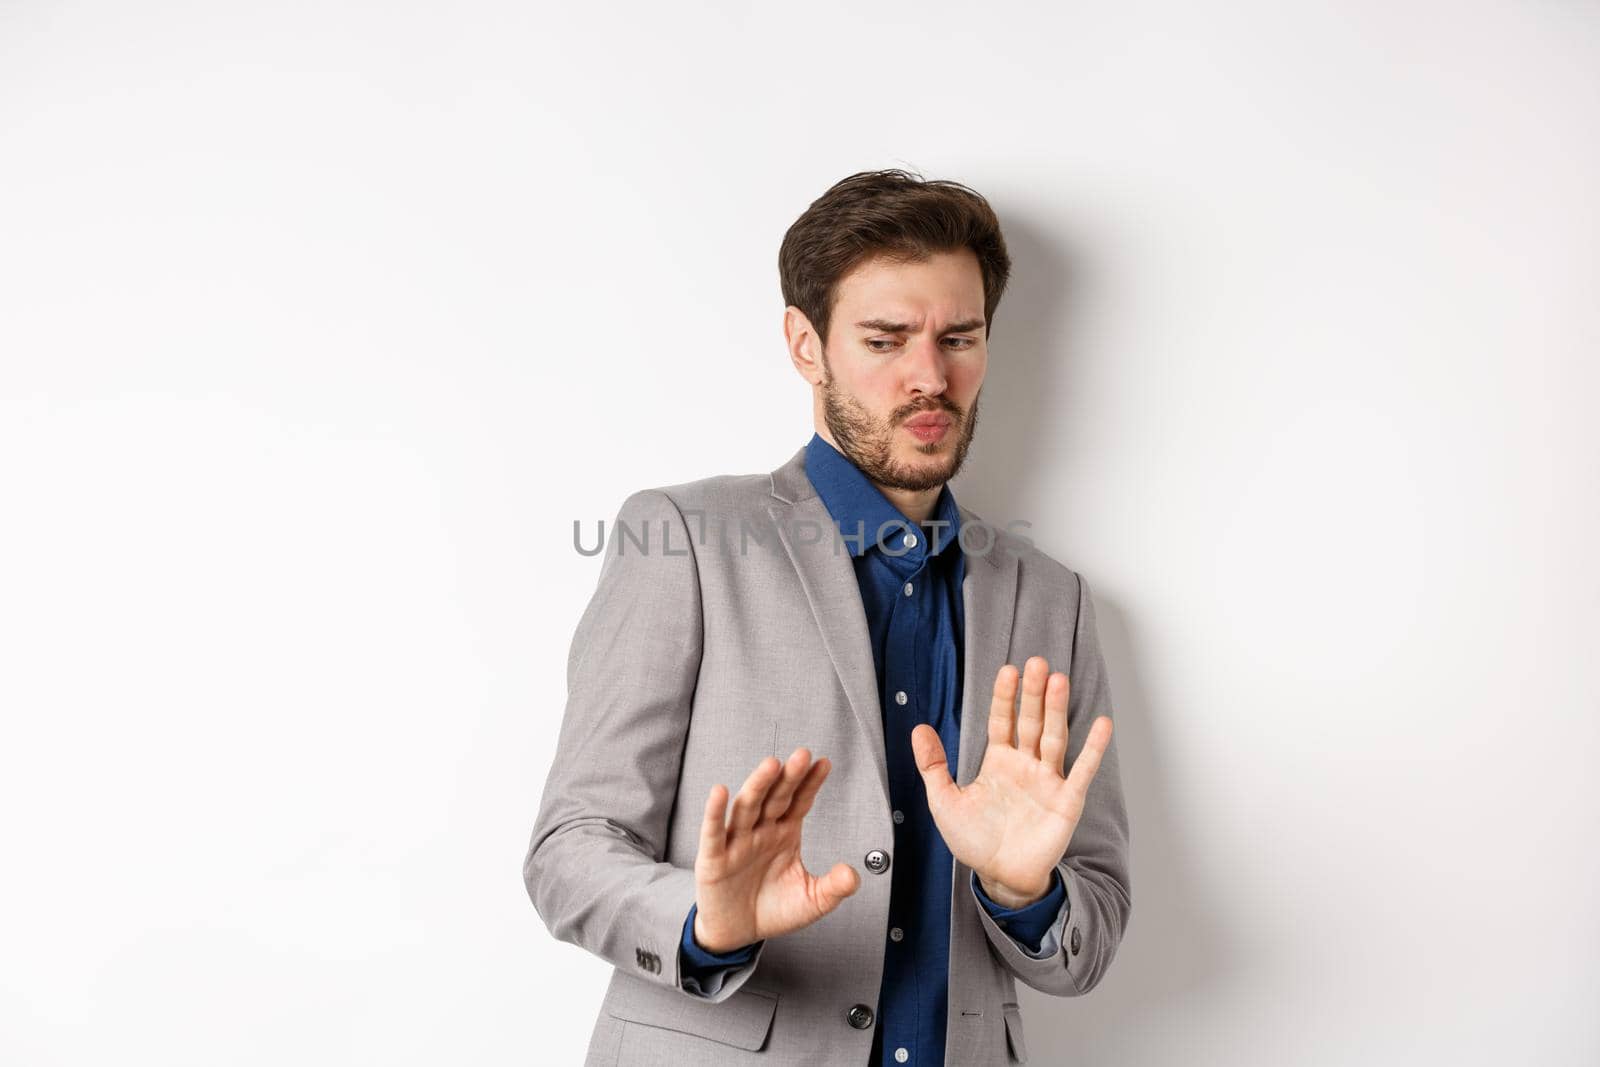 Stay away. Reluctant businessman step back with concerned disgusted face, raising hands to block bad offer, rejecting something awful, tilting from disgust, white background.